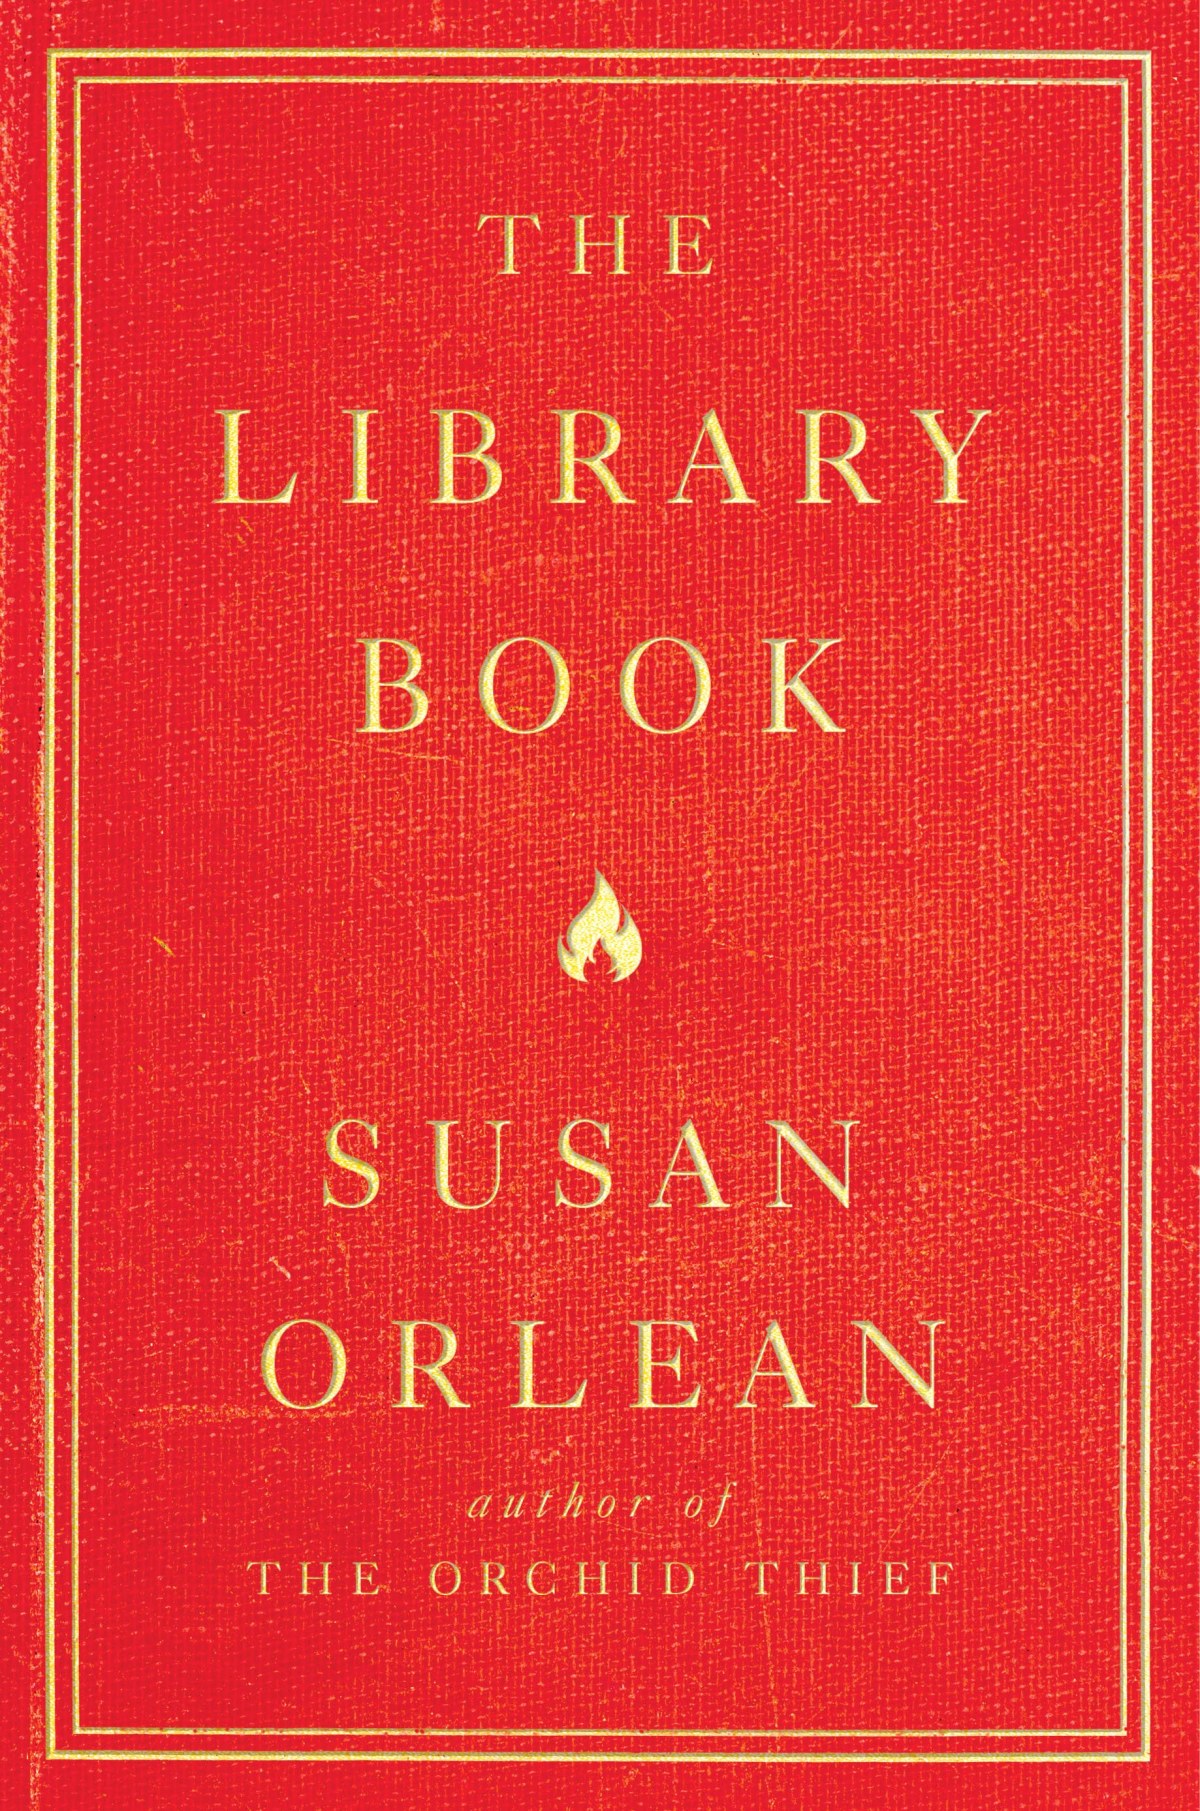 The Library Book by Susan Orlean